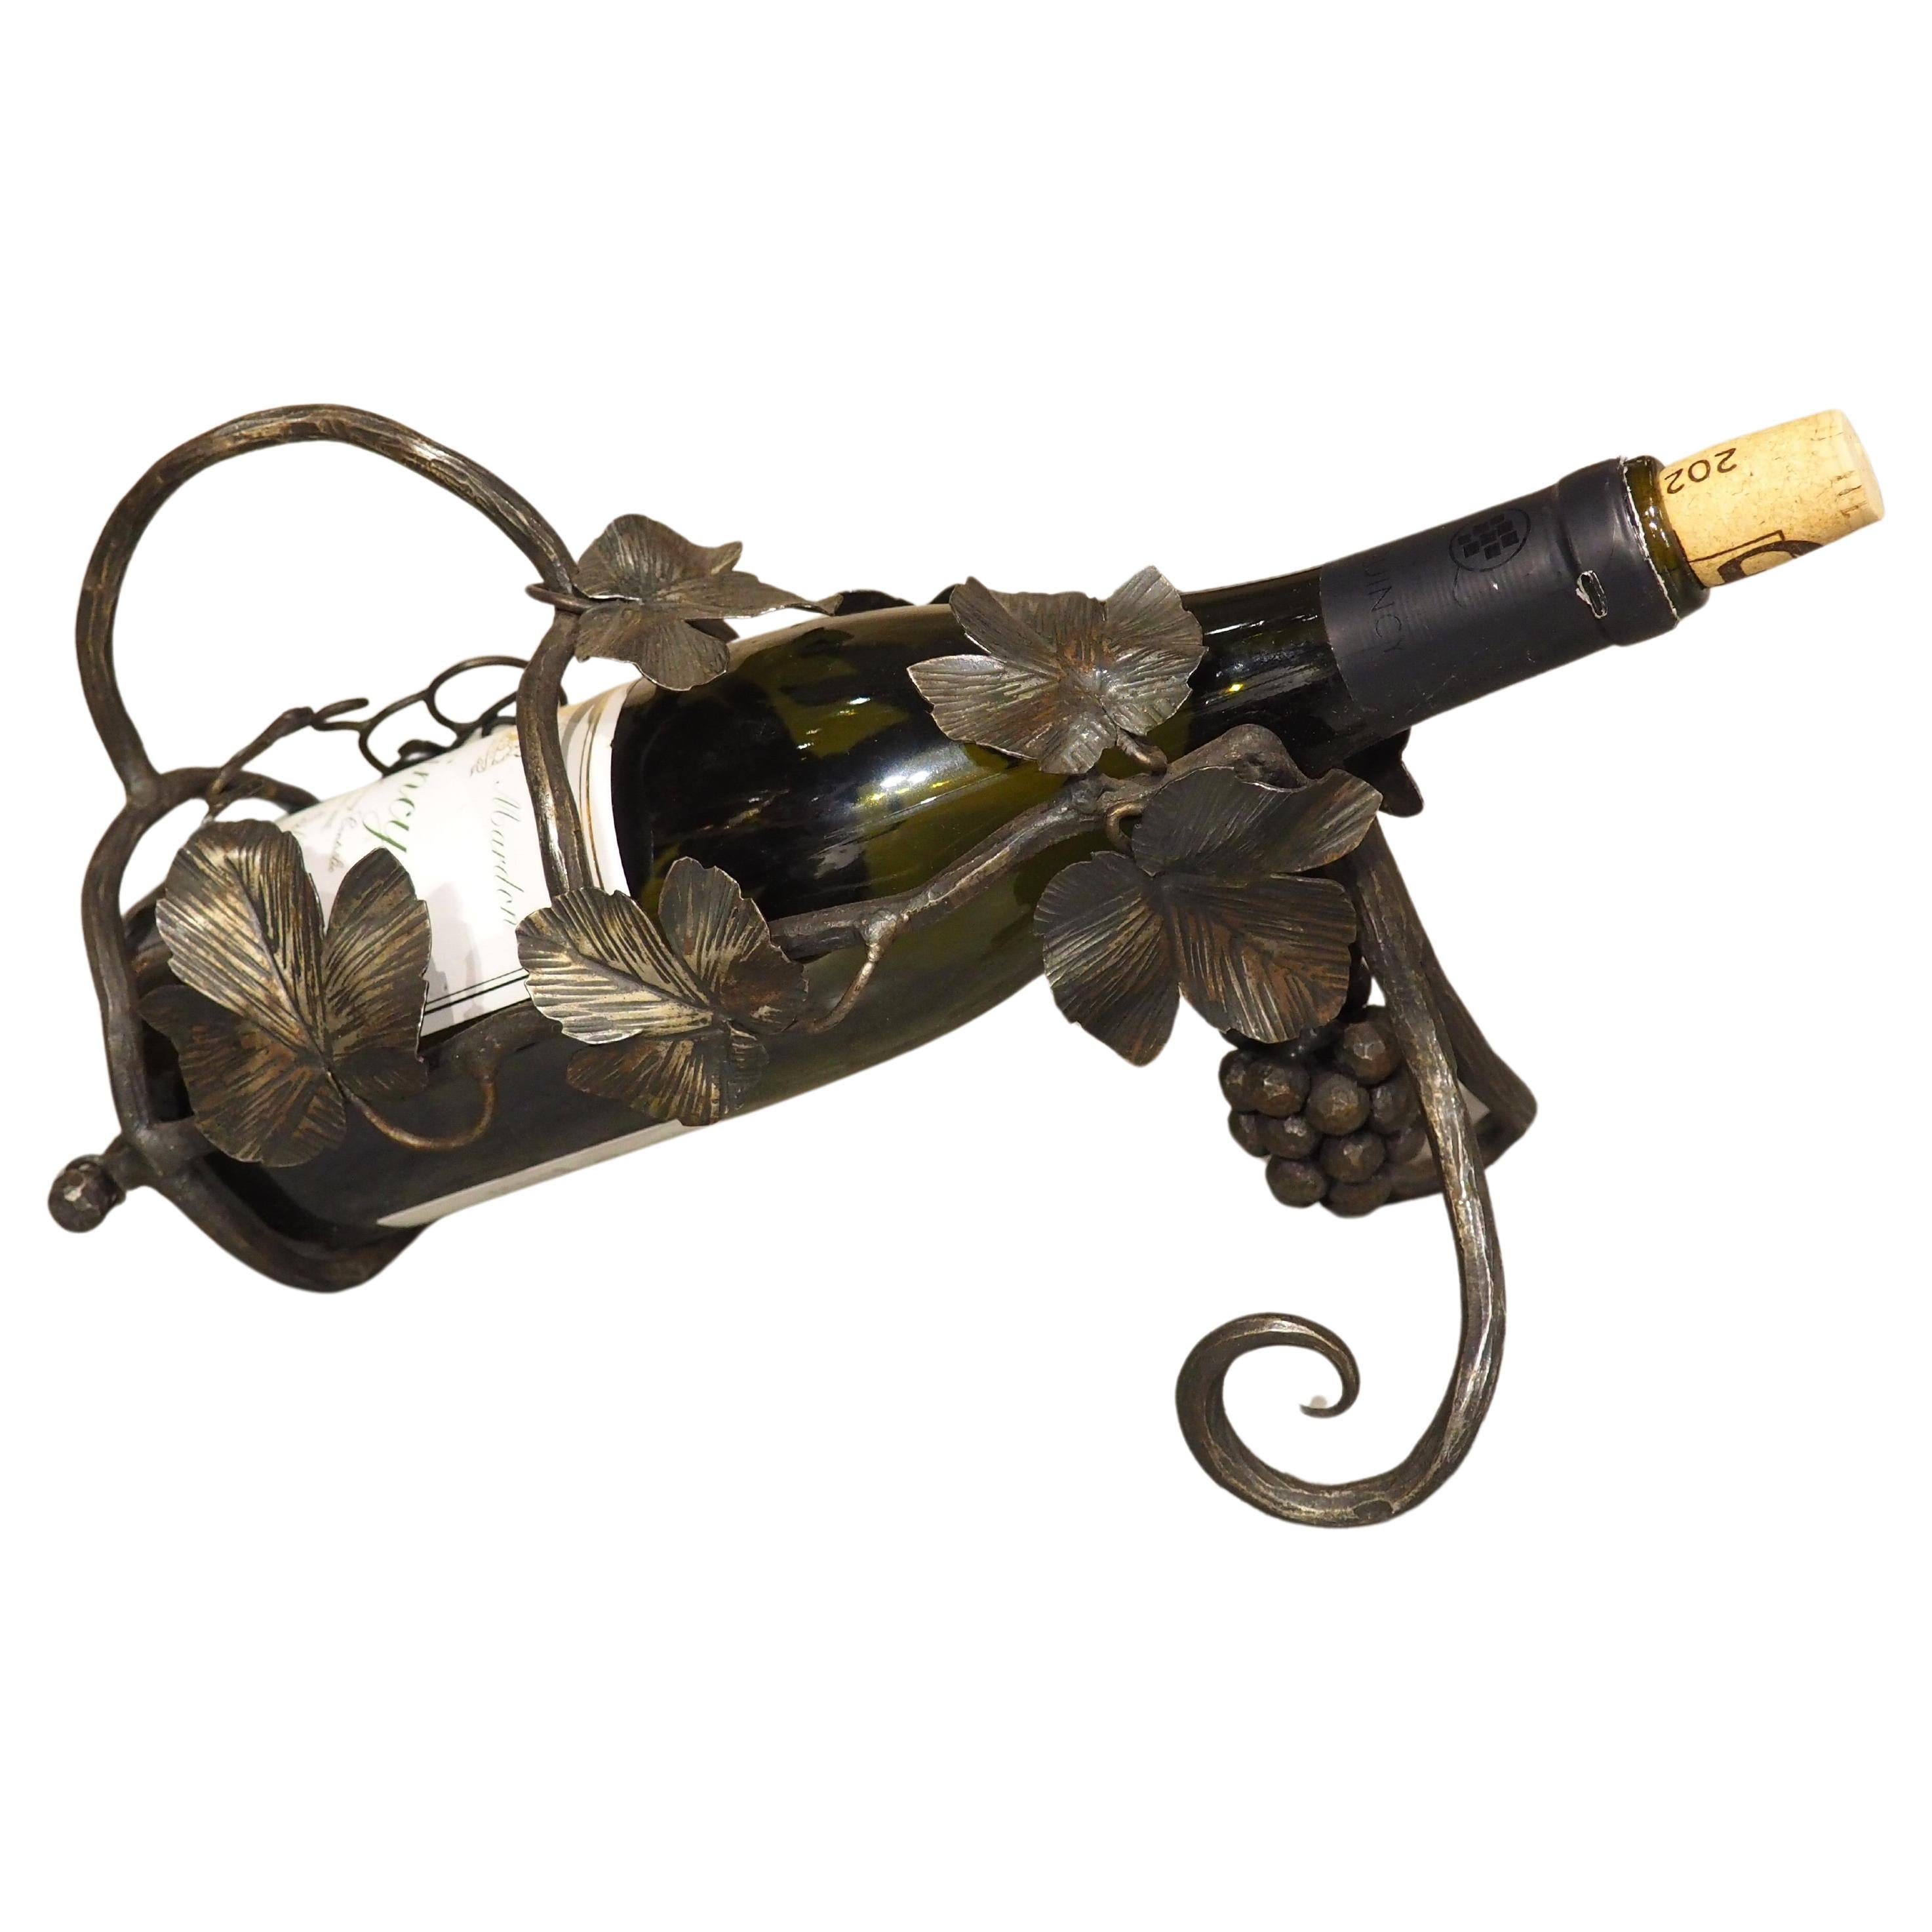 Antique French Wrought Iron Wine Bottle Holder from Beaune, C. 1900 For Sale